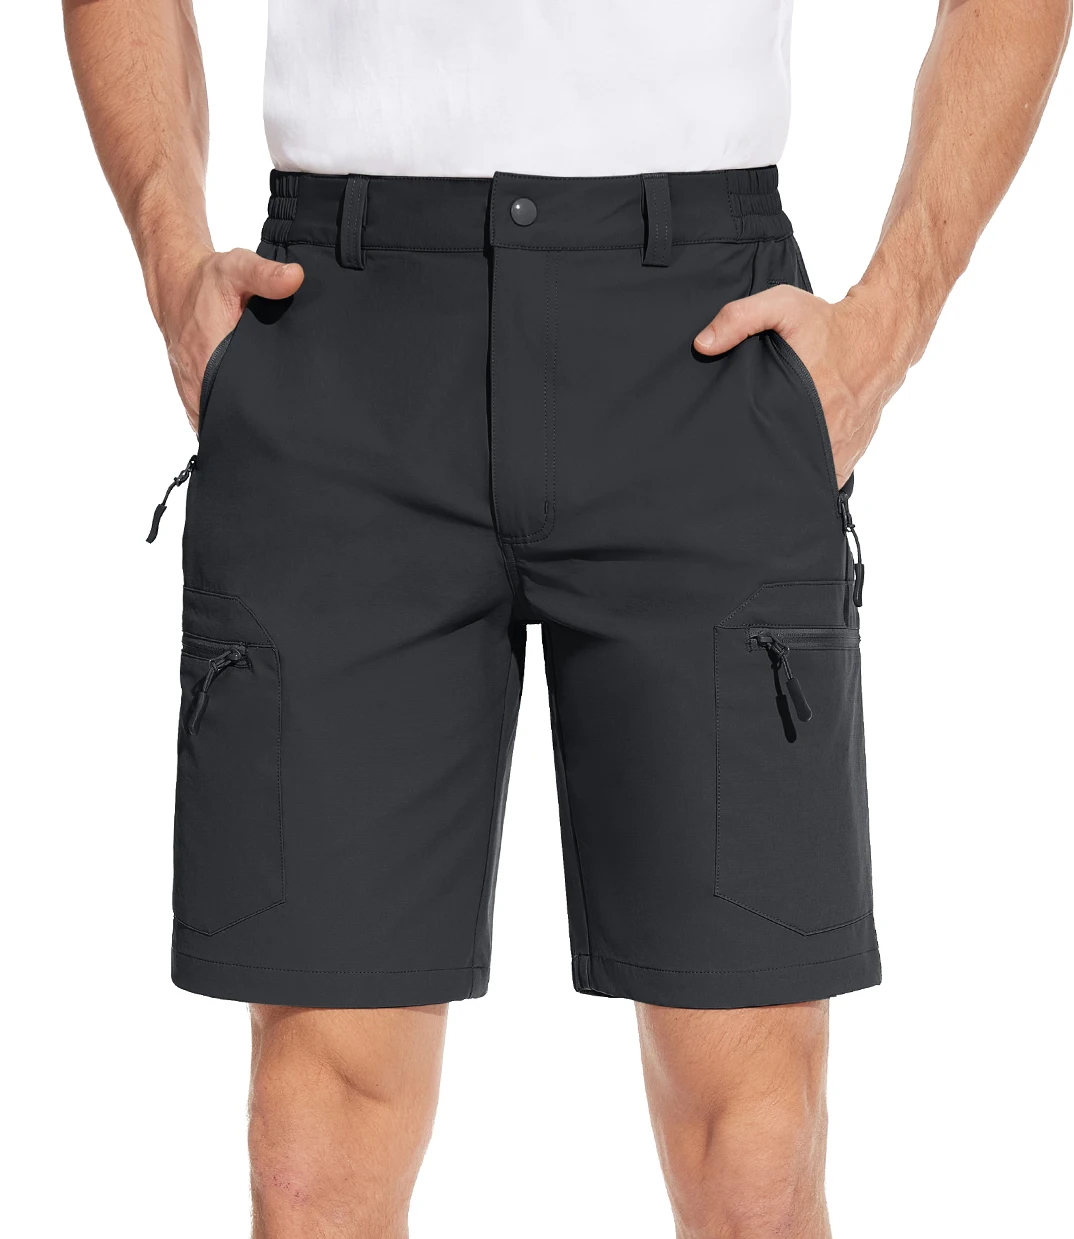 https://ae01.alicdn.com/kf/Sf3f59d5f6fdf45709451acada2e1620a1/KEFITEVD-Summer-Outdoor-Quick-Dry-Hiking-Shorts-Mens-Camping-Fishing-Work-Shorts-with-Zipper-Pockets-Athletic.jpg